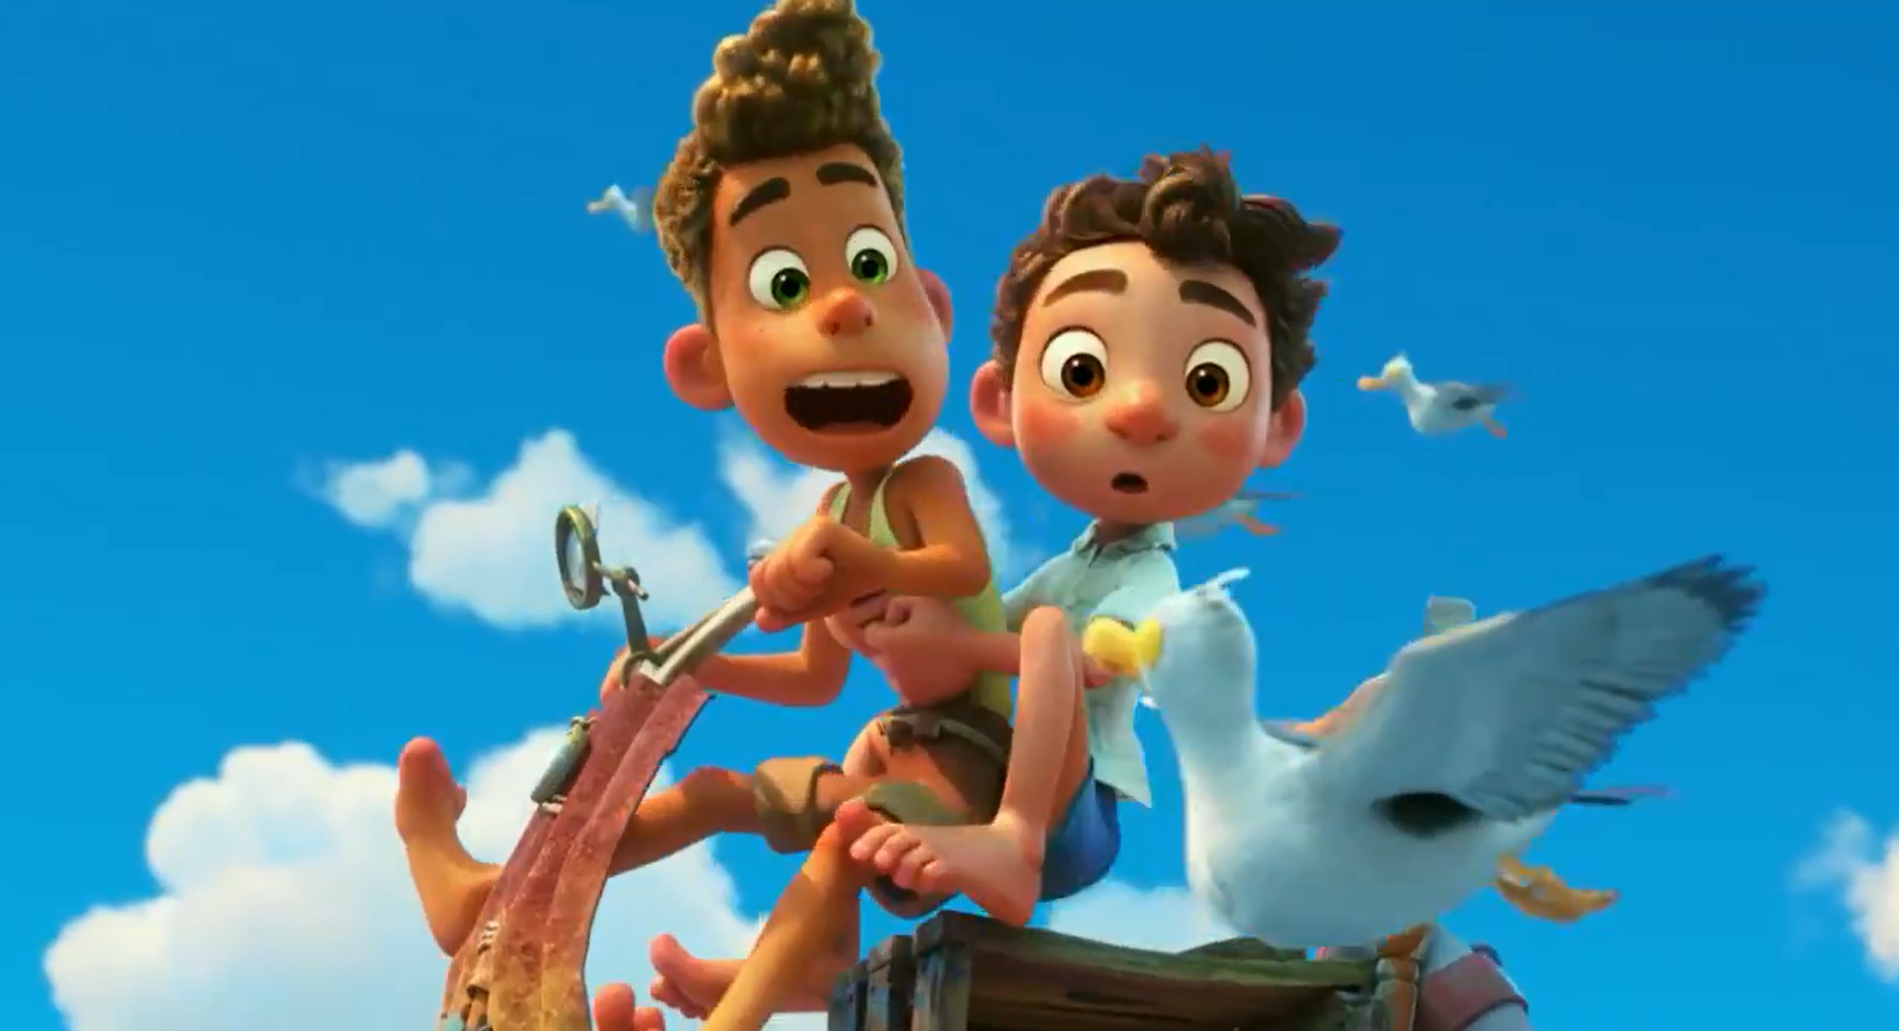 Luca trailer - Pixar releases first trailer for new movie